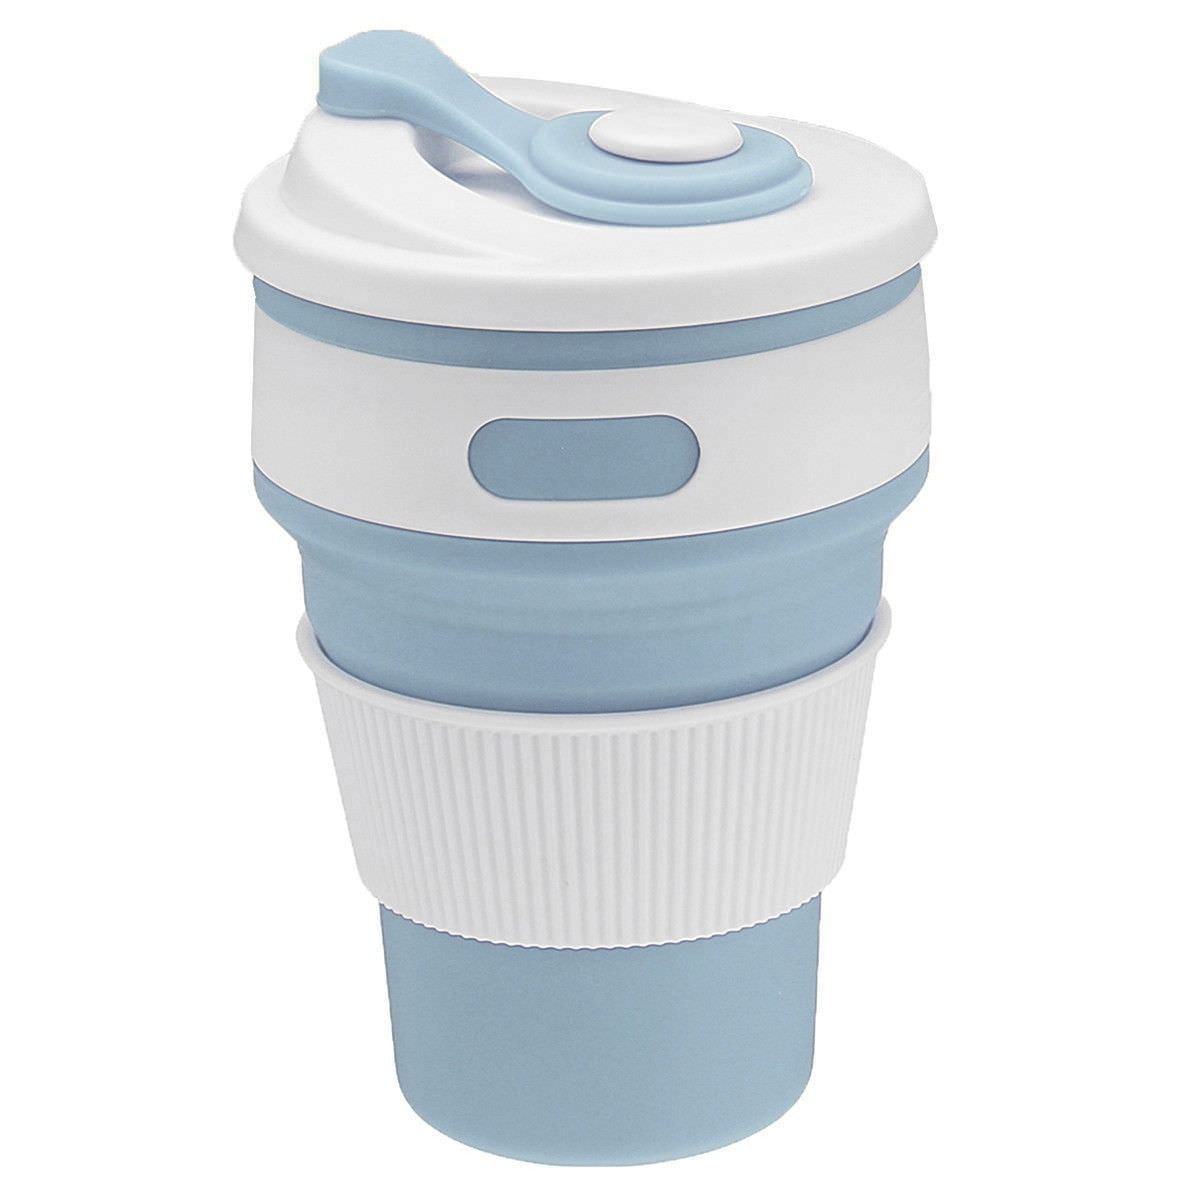 Telescopic Collapsible Silicone Cup Coffee Cups Kitchen & Dining Drinking Mug 